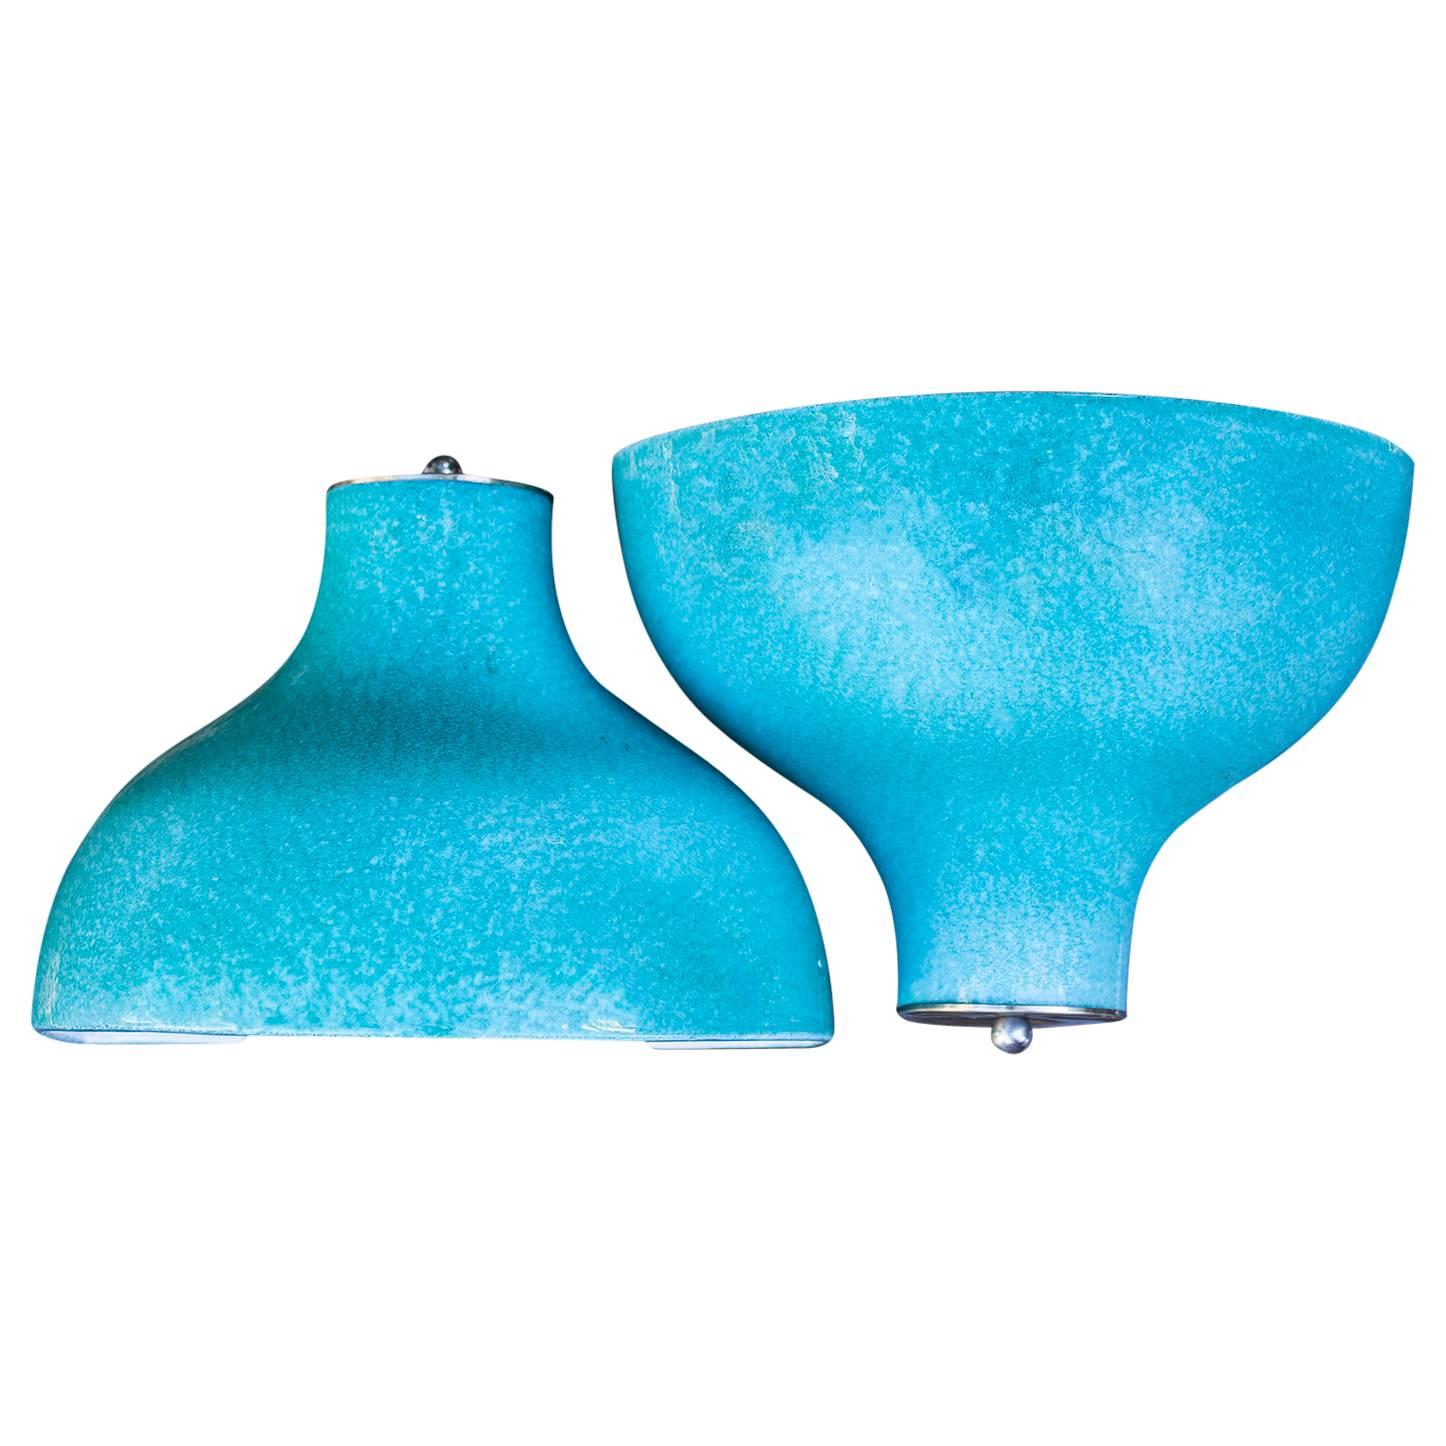 Two Turquoise Ceramic Wall Sconces, Italy, 1970